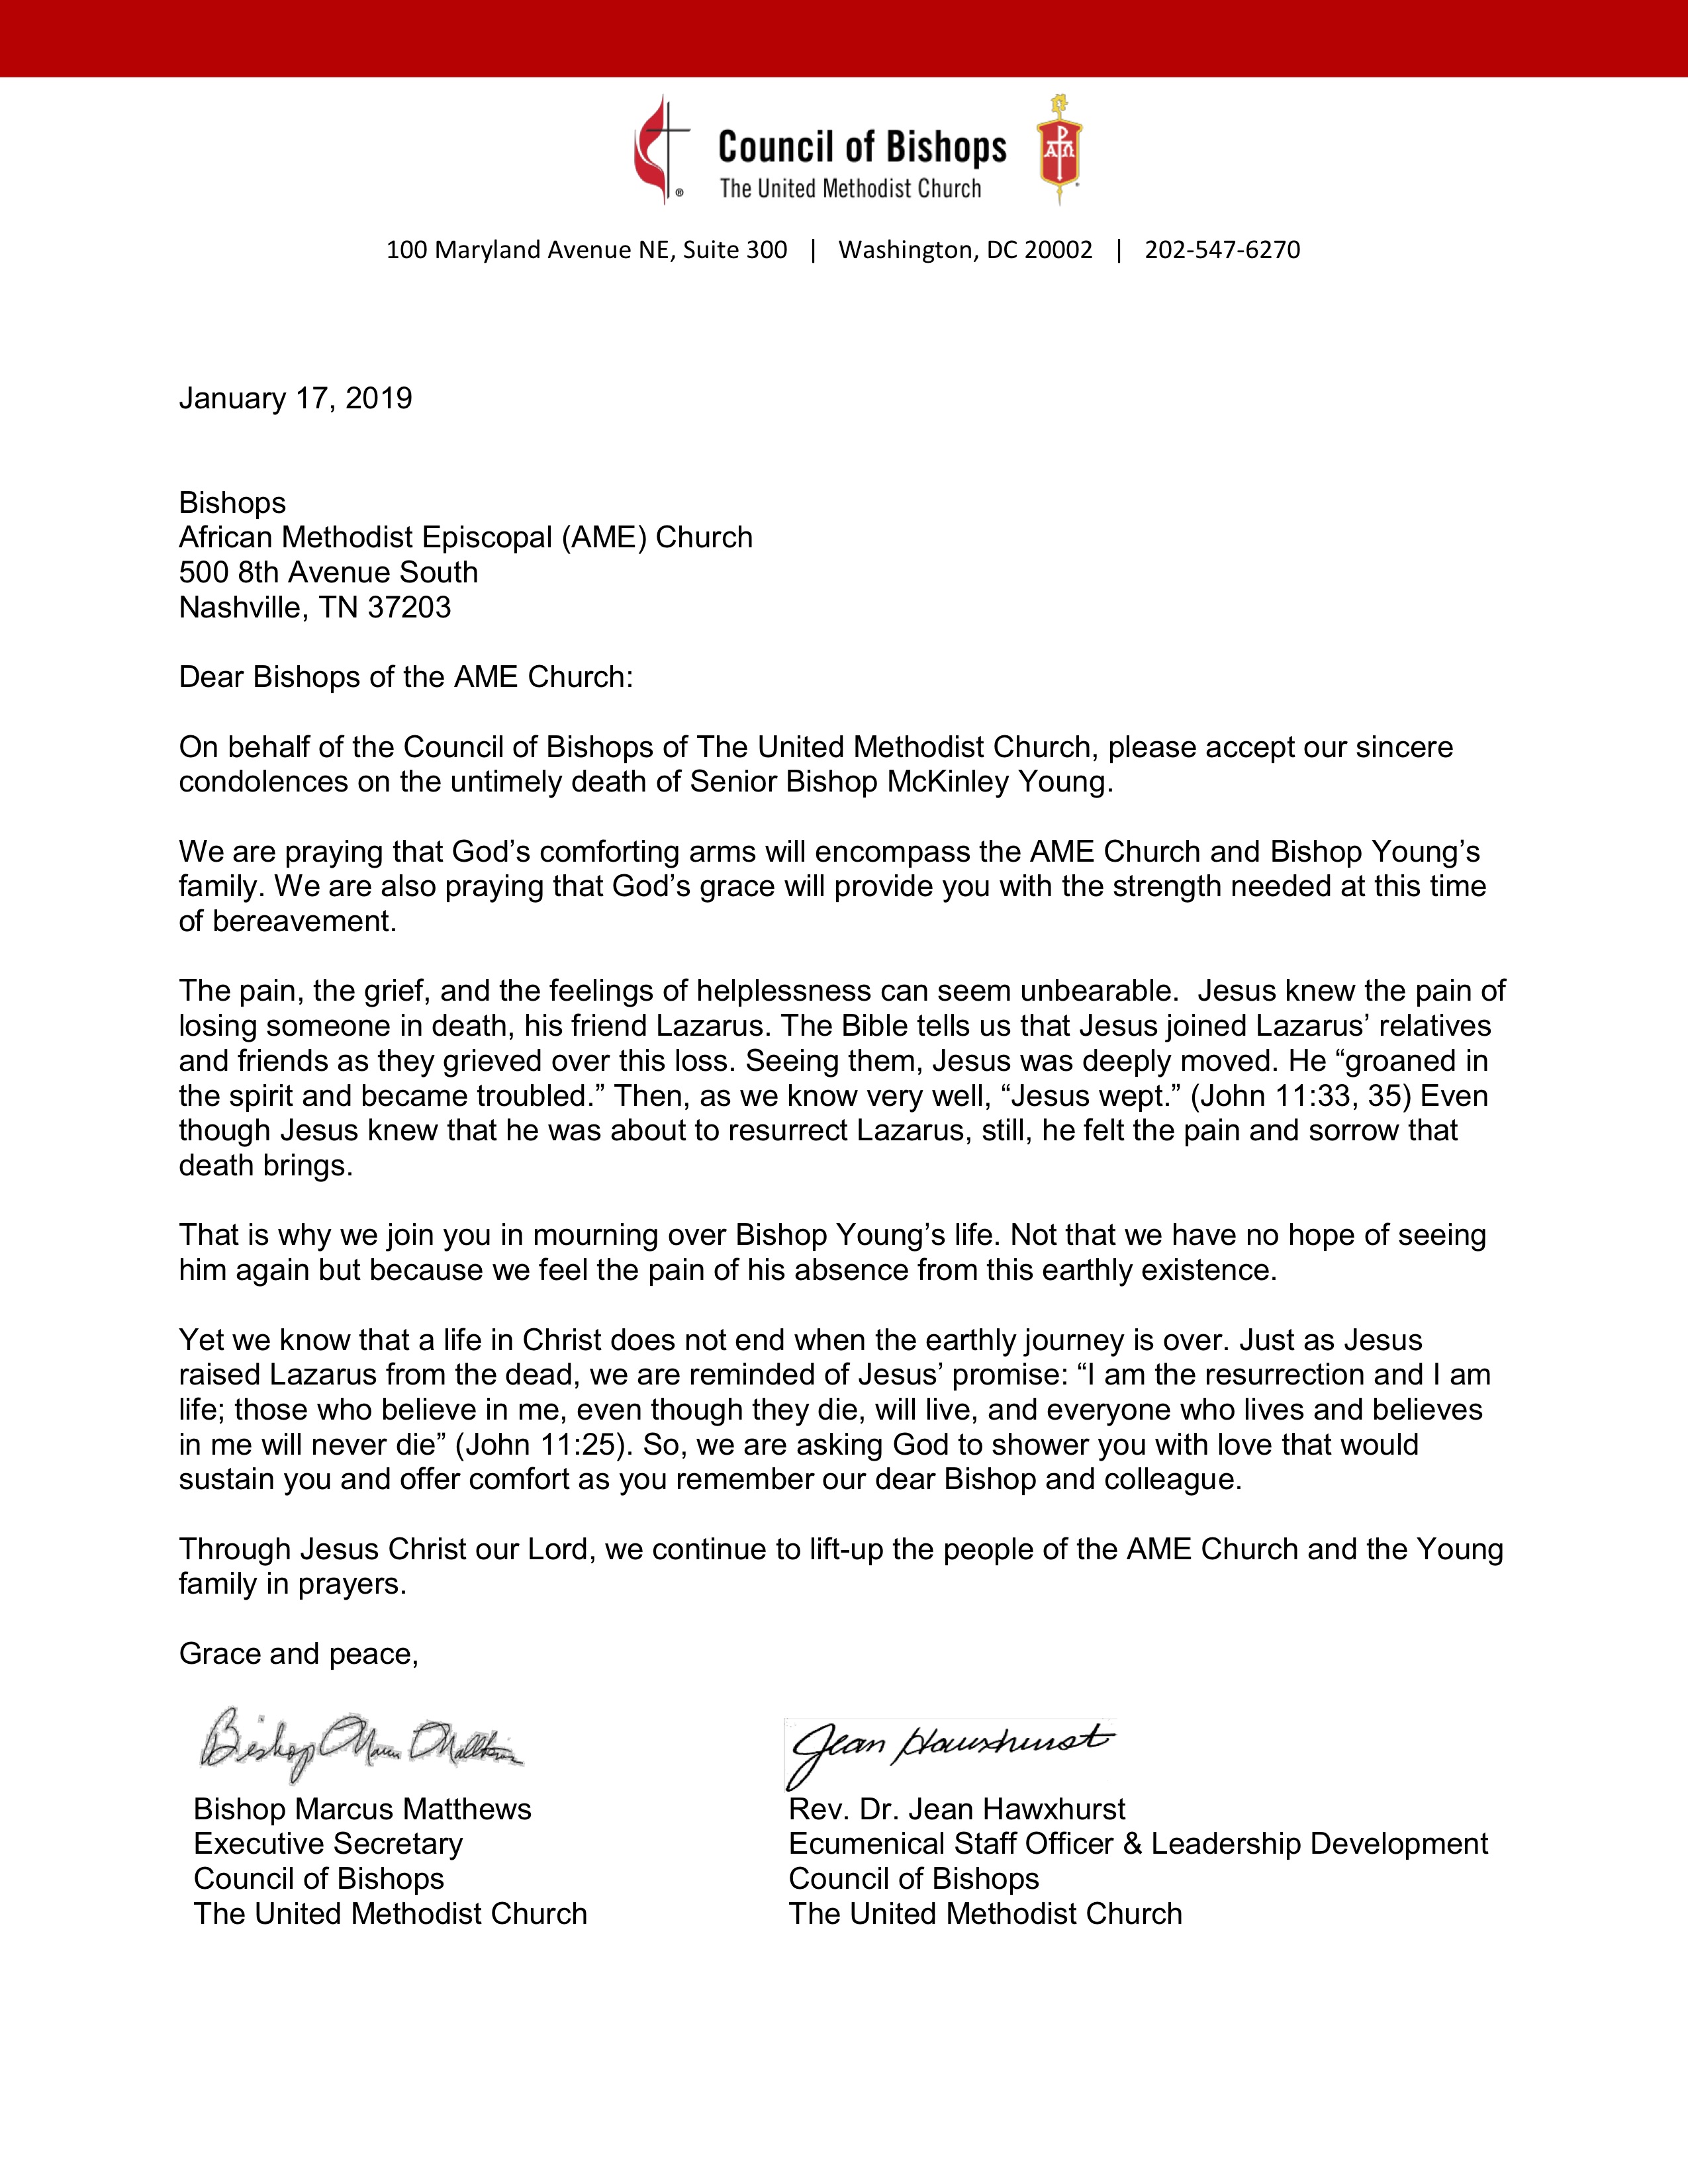 Sample Religious Condolence Letter from www.ame-church.com